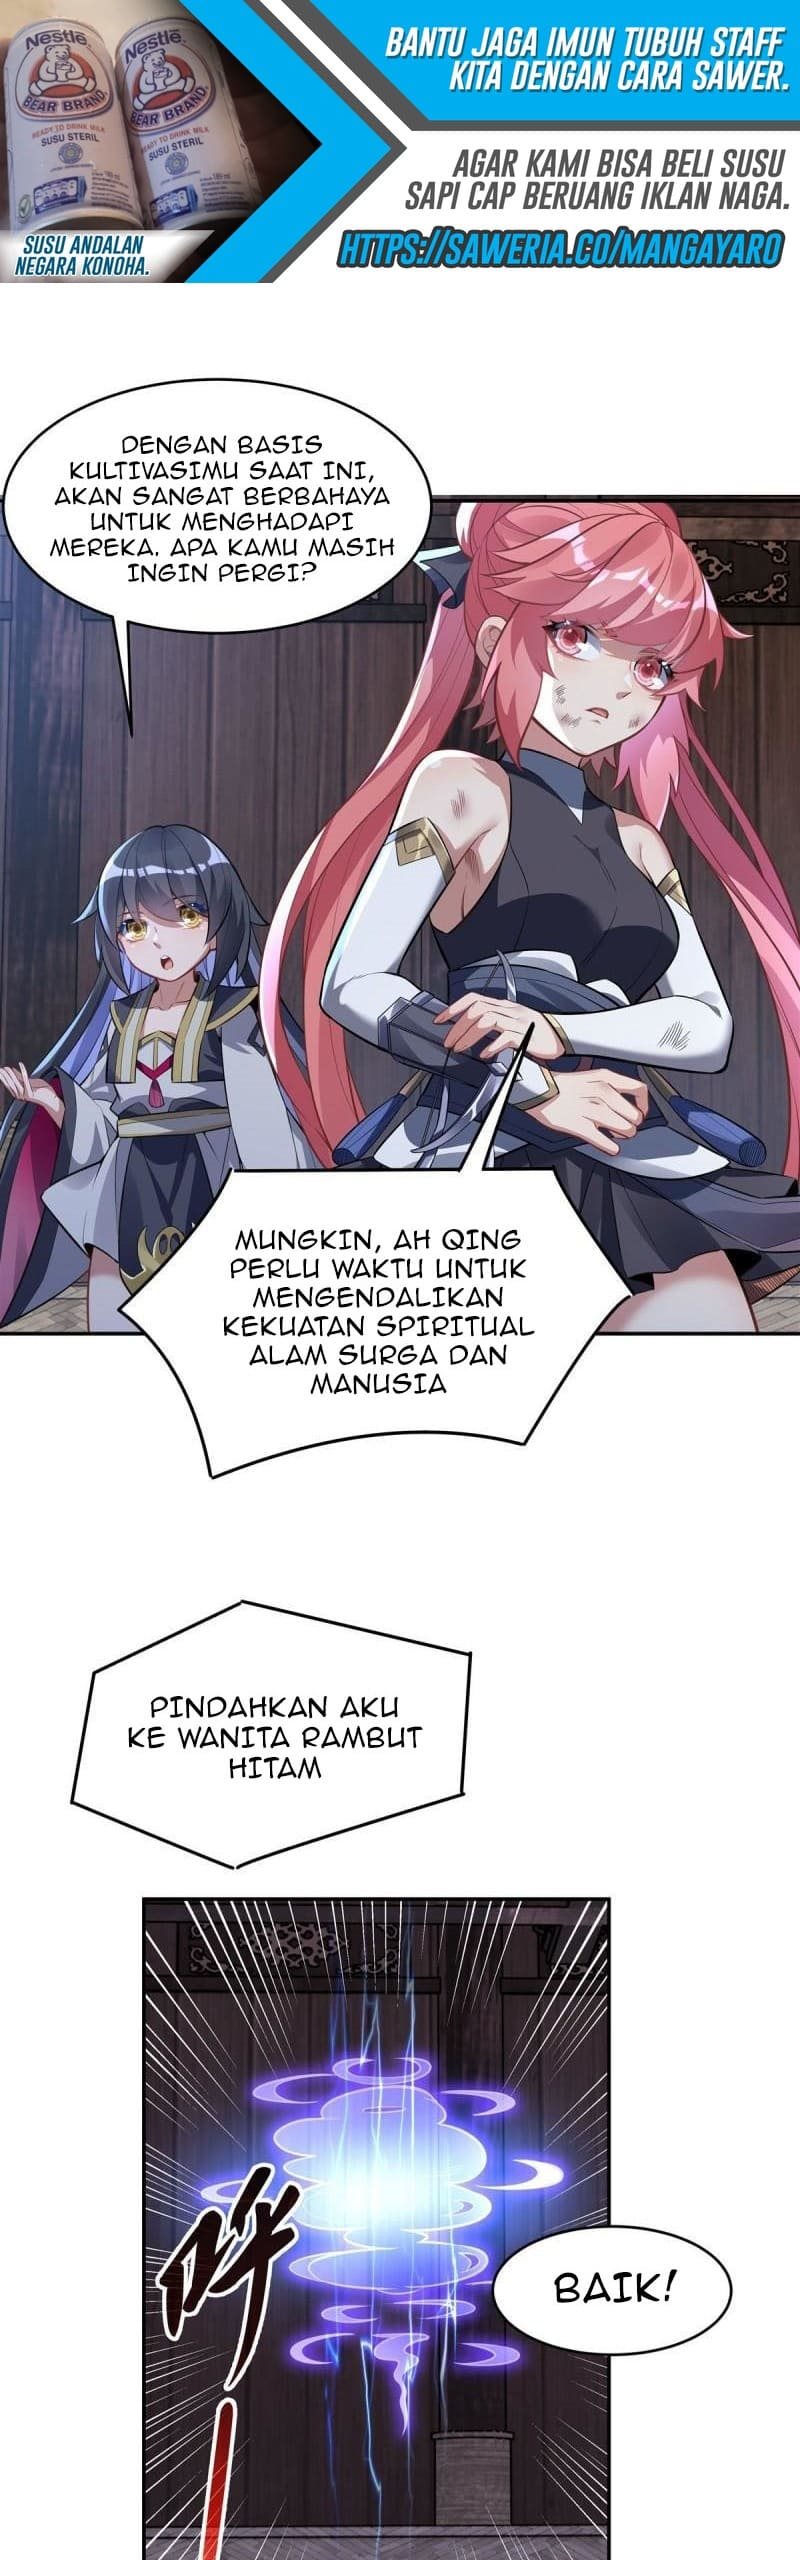 Dilarang COPAS - situs resmi www.mangacanblog.com - Komik my female apprentices are all big shots from the future 065 - chapter 65 66 Indonesia my female apprentices are all big shots from the future 065 - chapter 65 Terbaru 10|Baca Manga Komik Indonesia|Mangacan